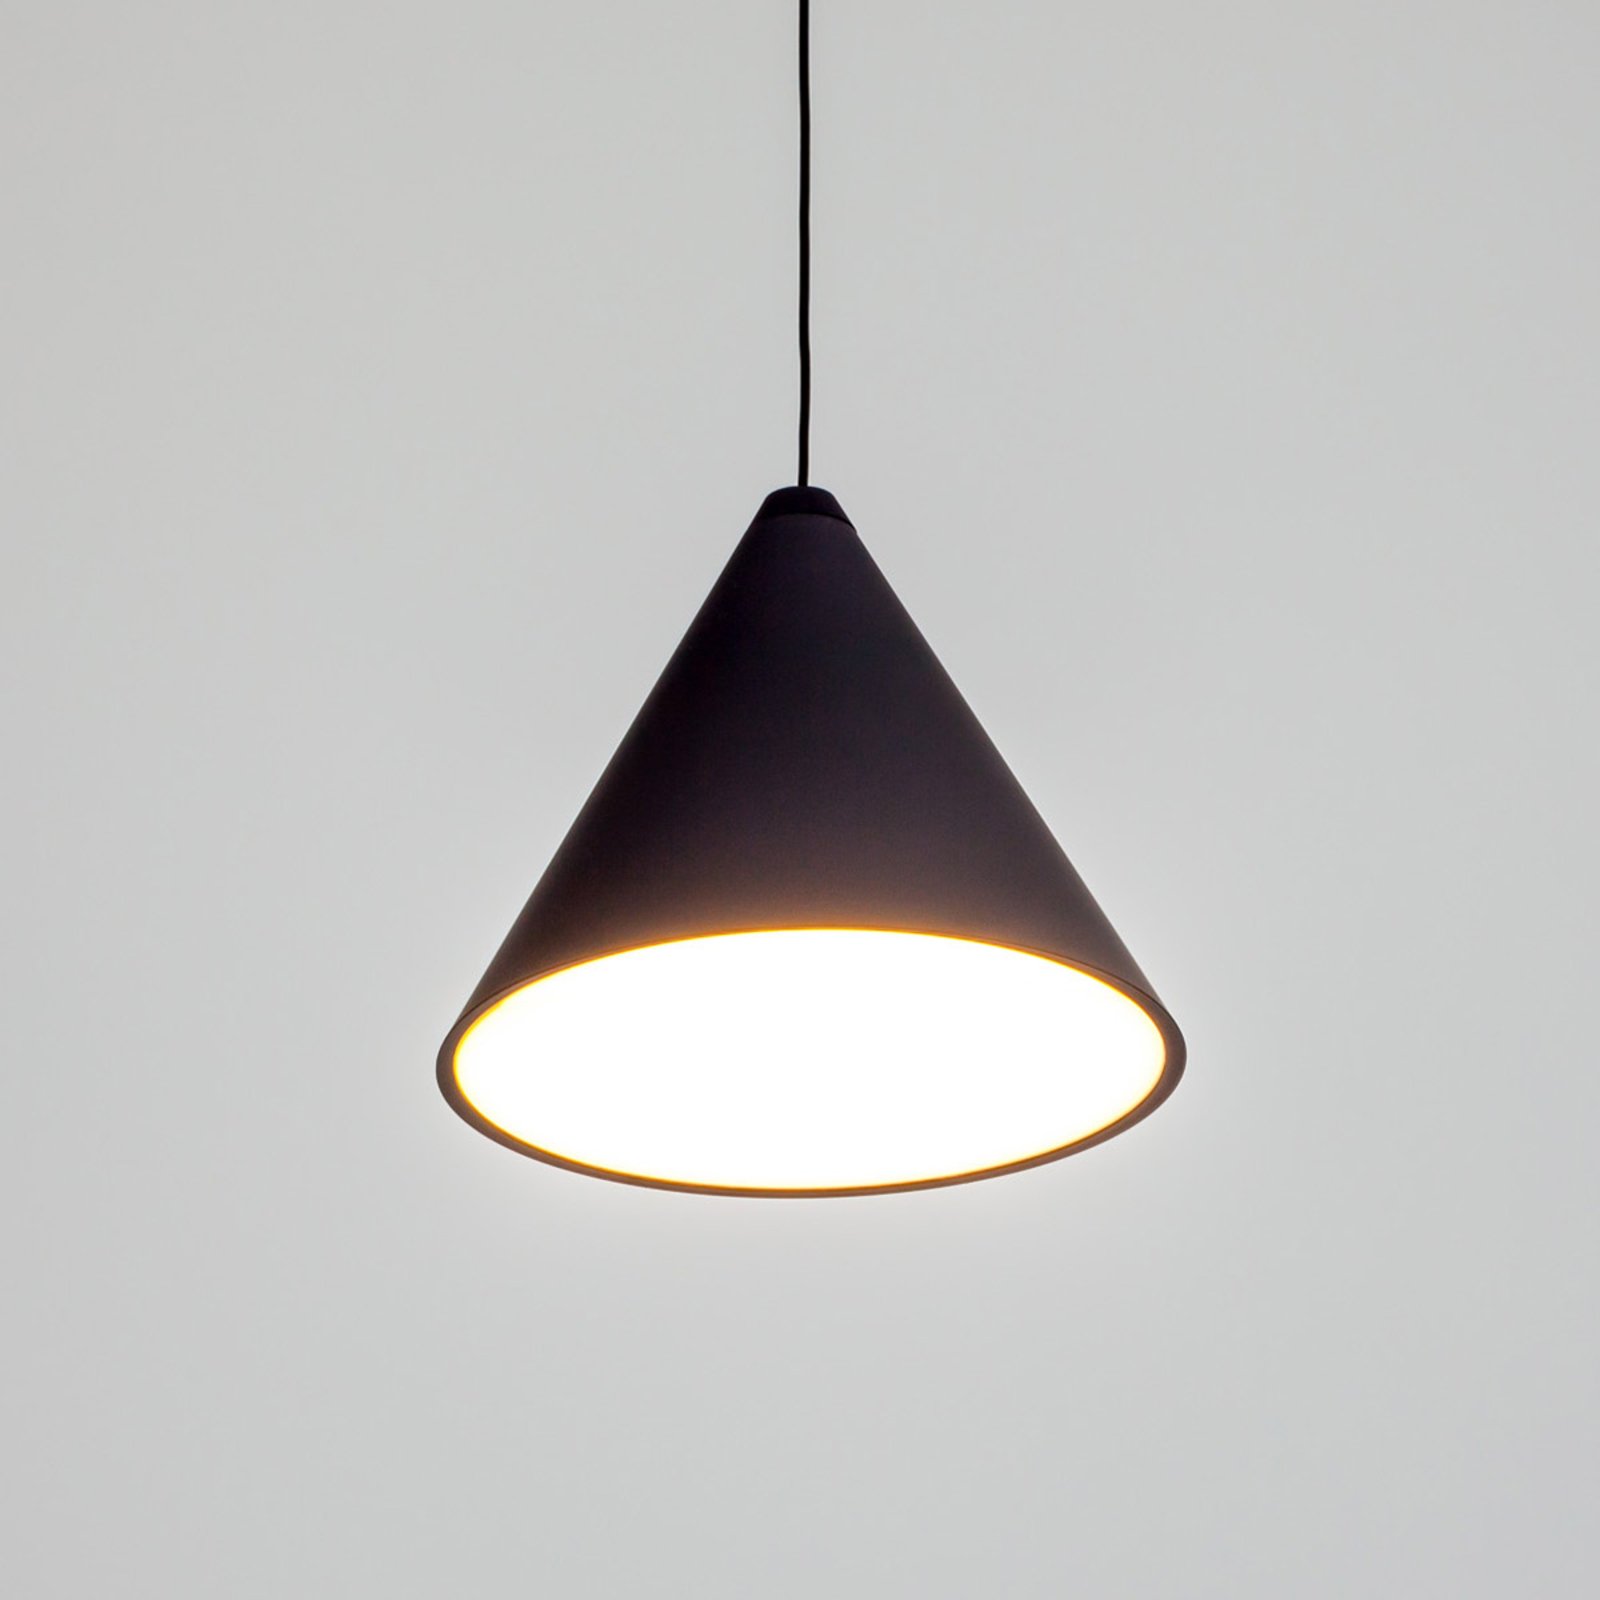 FLOS String light hanging light, 12 m cable cone